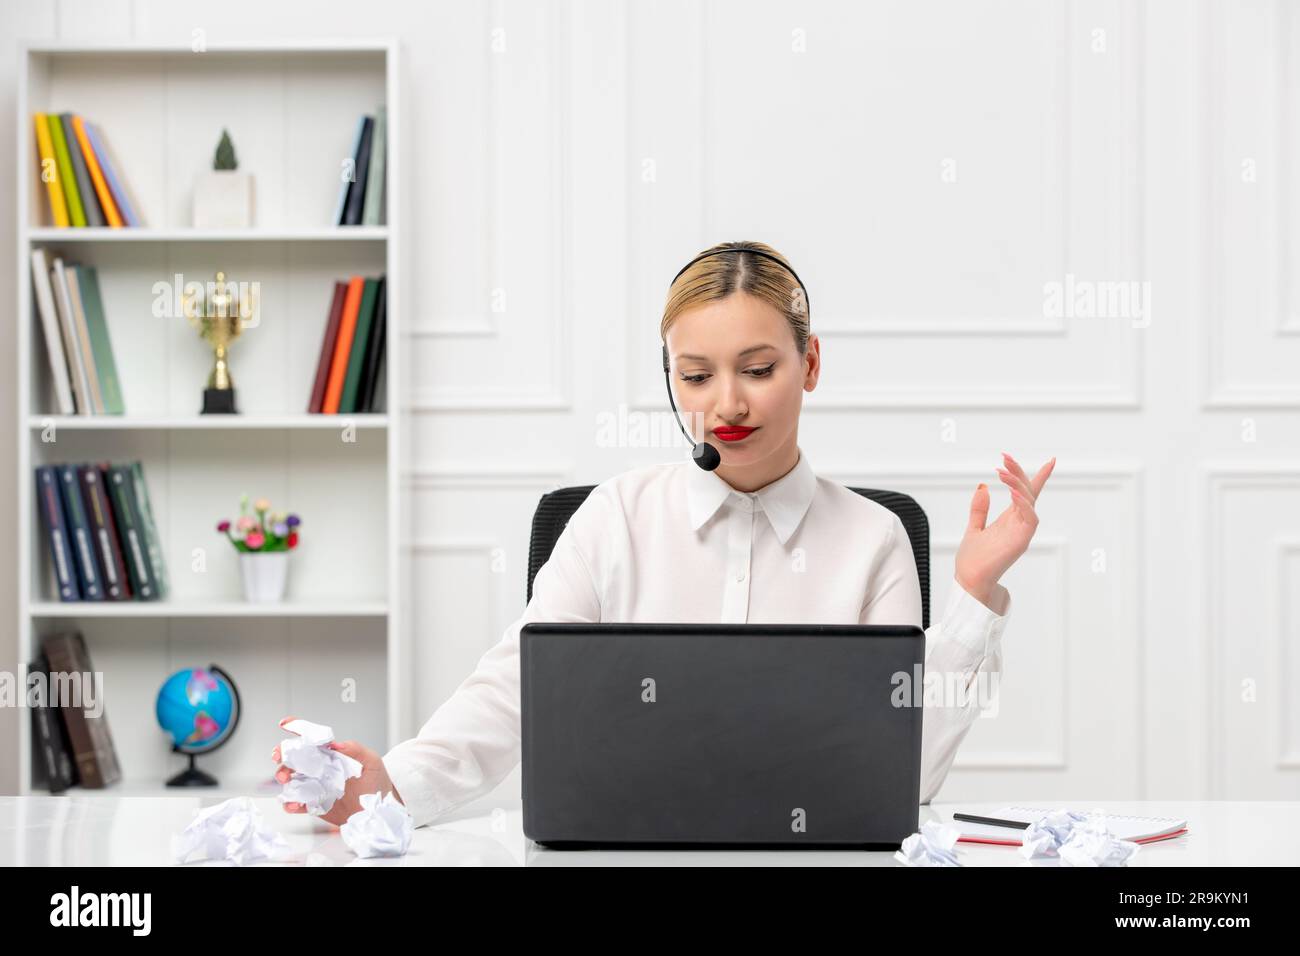 customer service cute blonde girl office shirt with headset and computer thinking Stock Photo